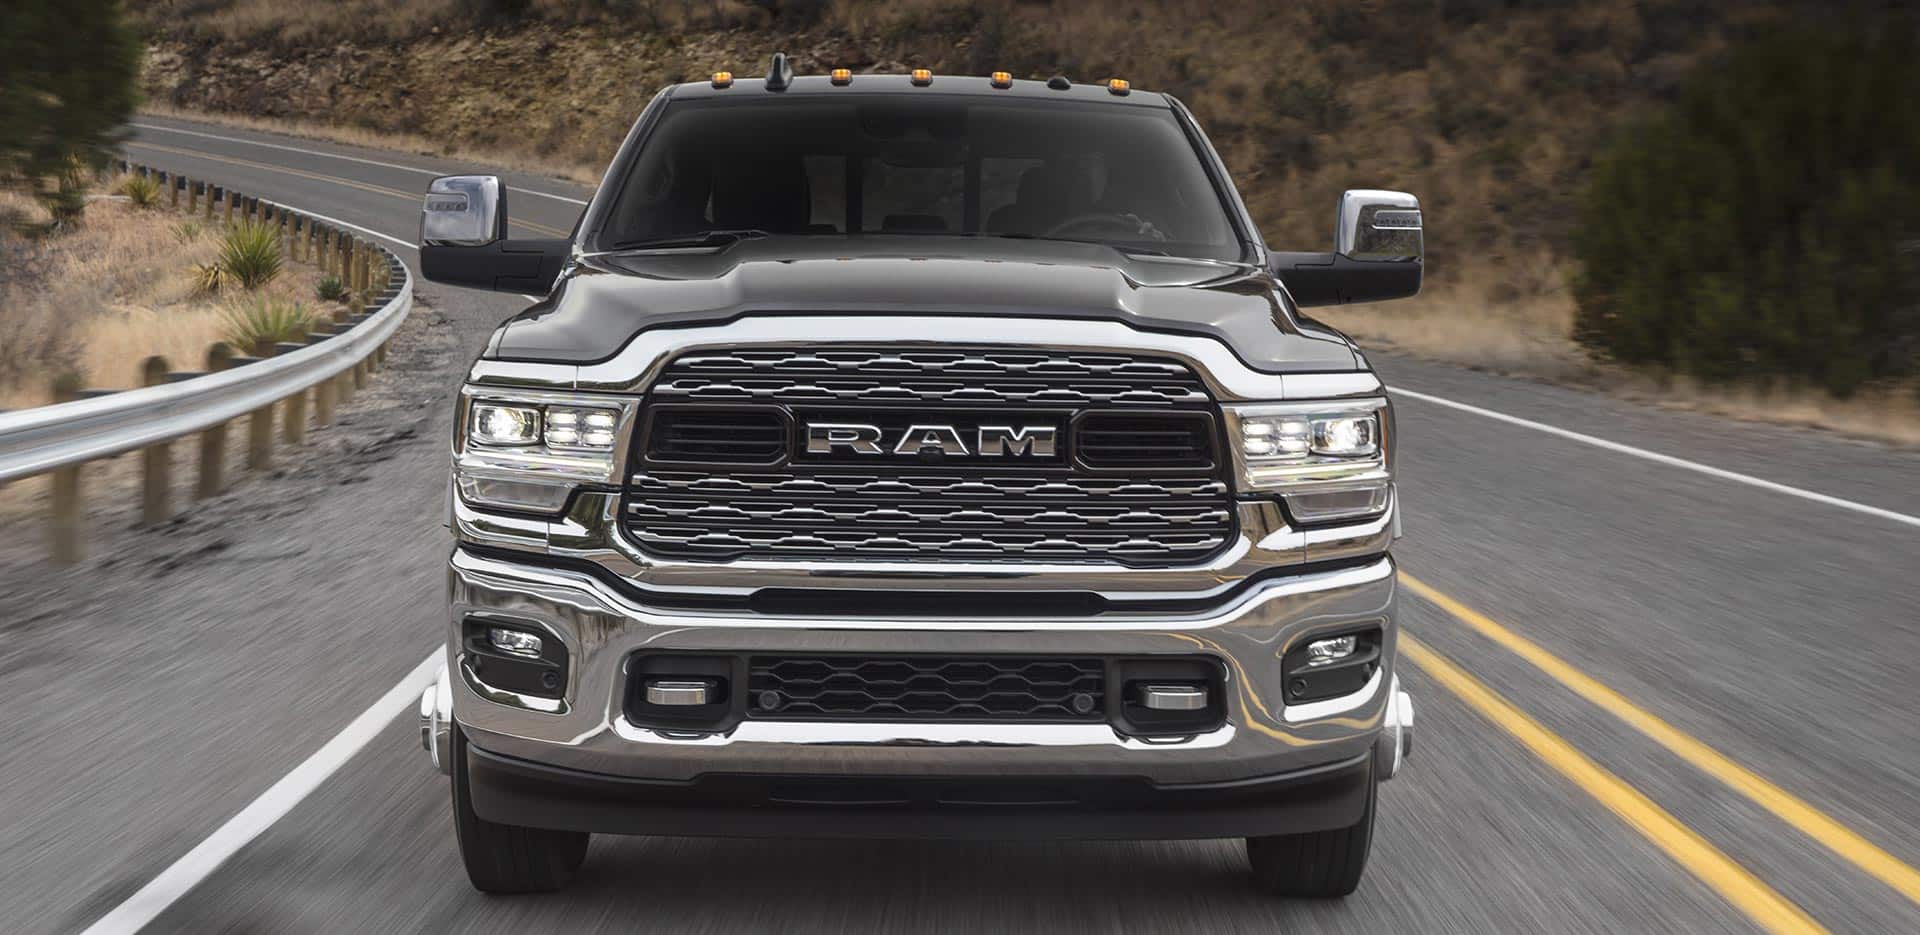 Display A head-on view of a 2023 Ram 3500 Limited being driven on a winding highway.